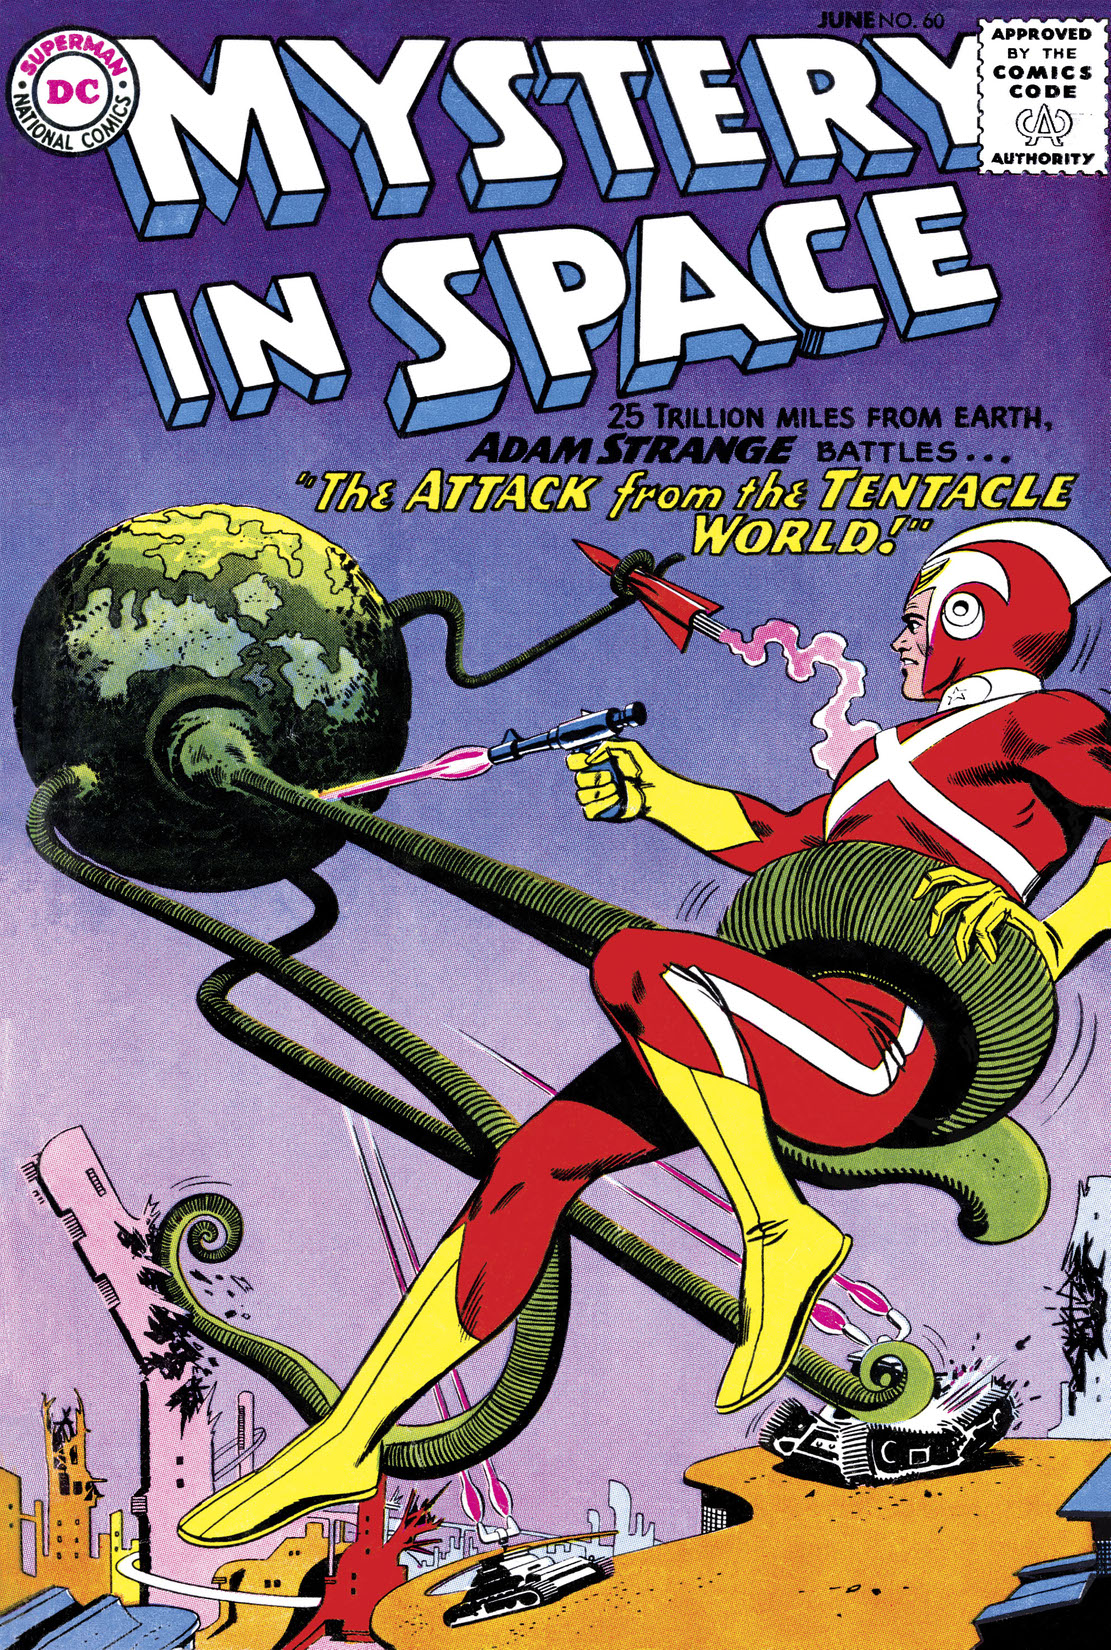 Mystery in Space (1951-1981) #60 preview images